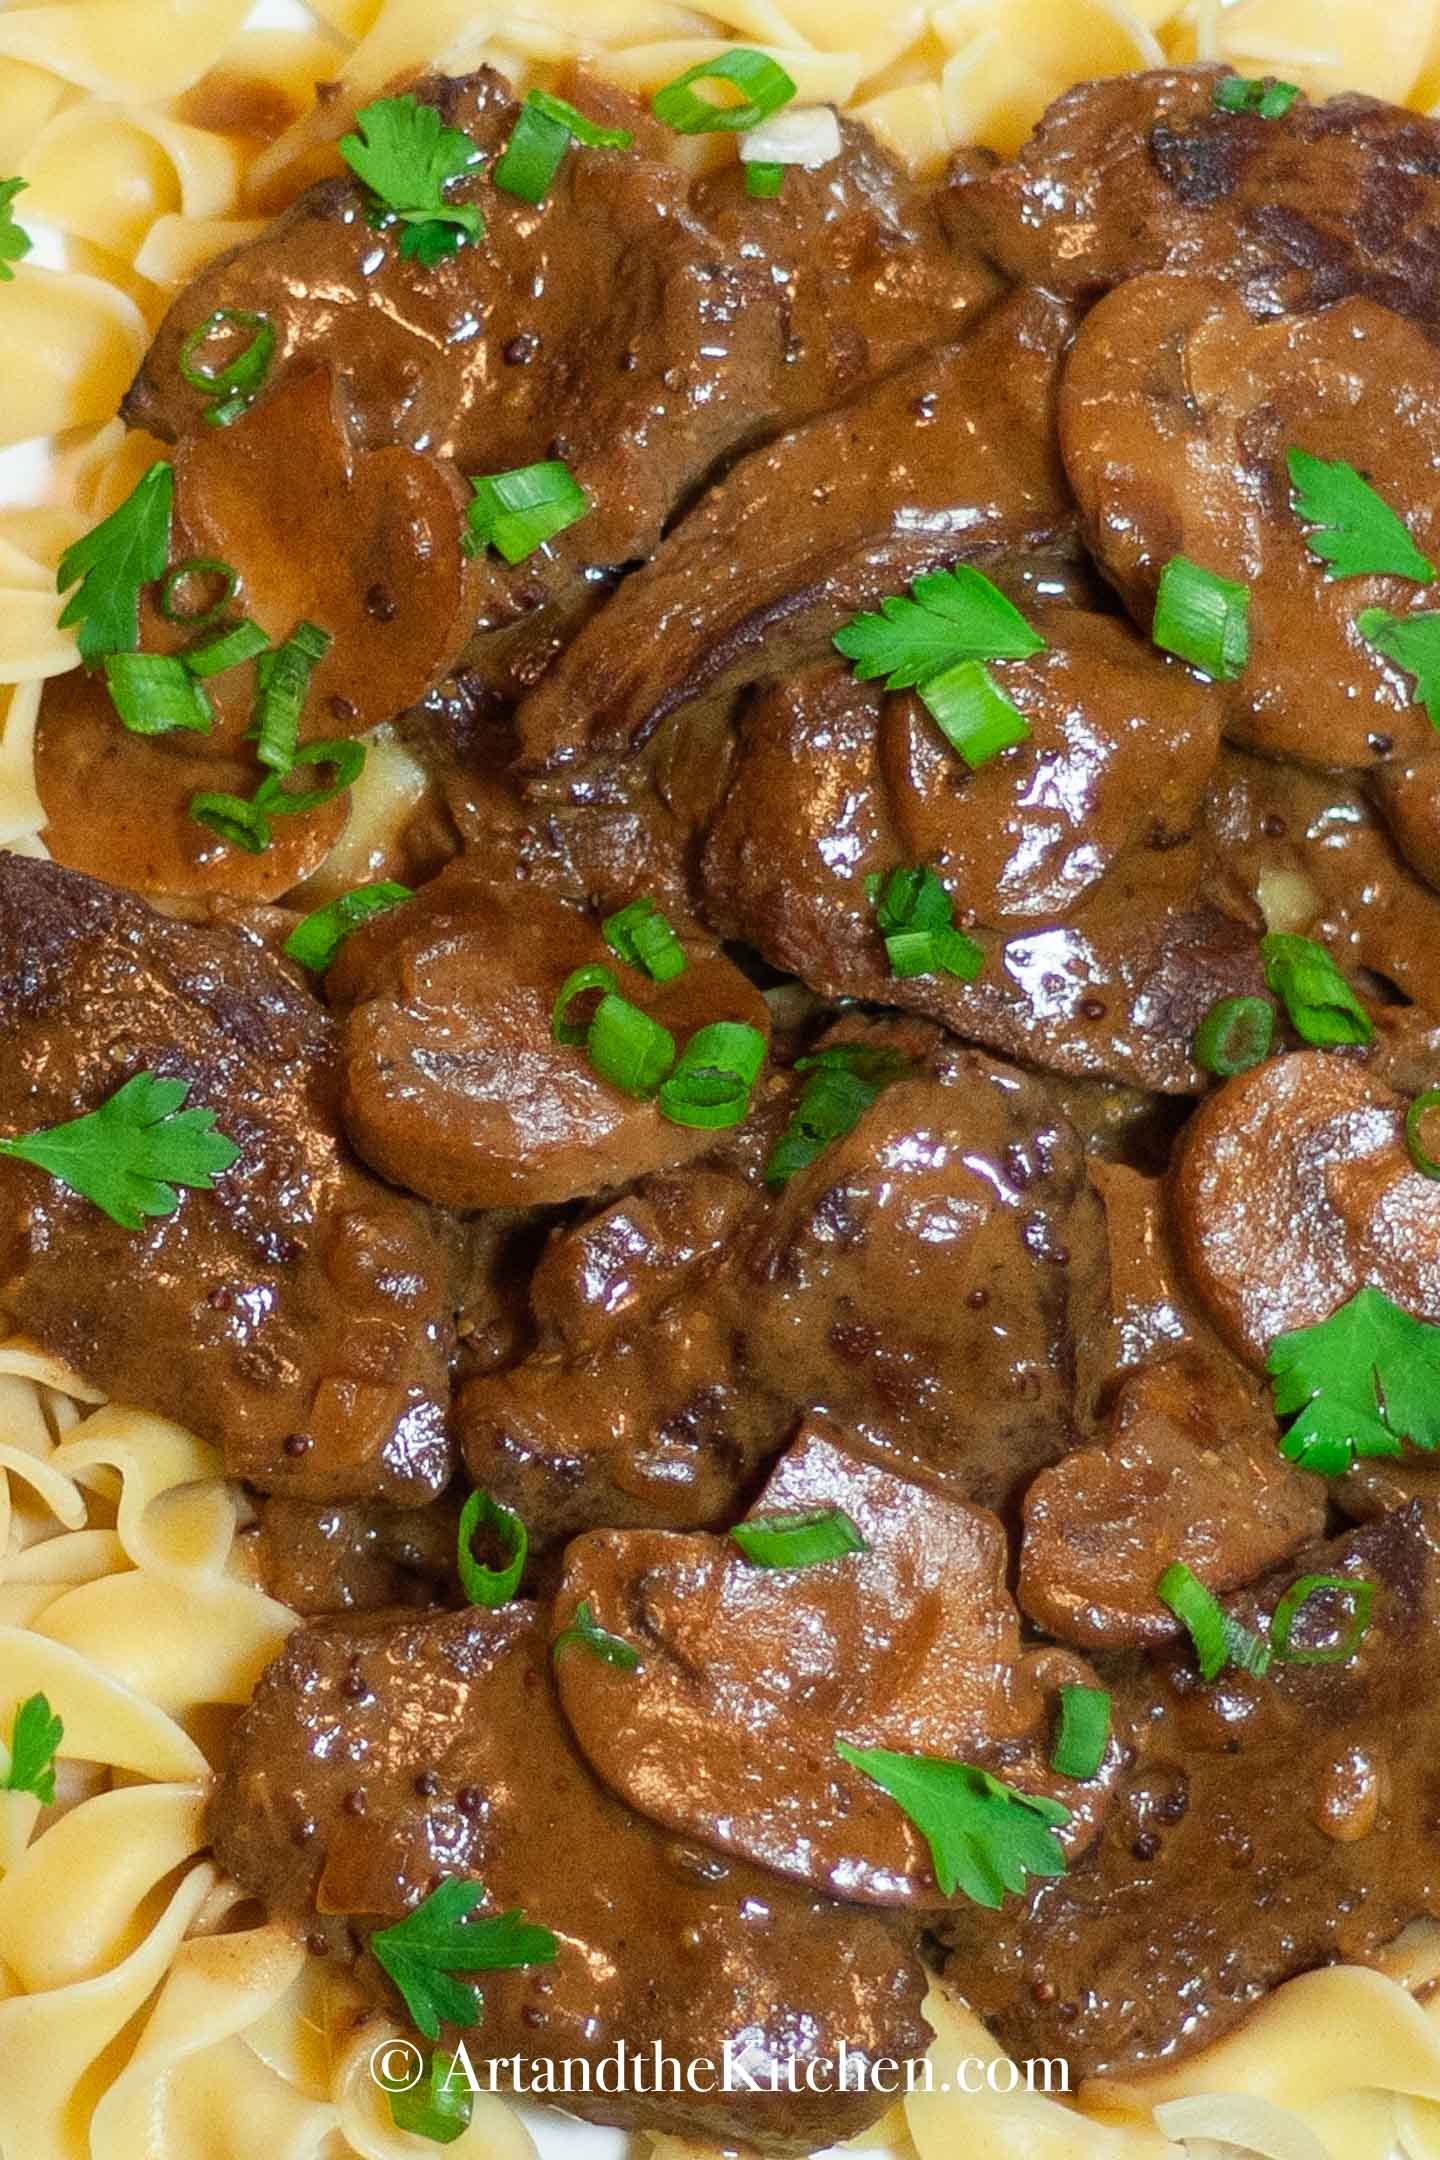 Beef stroganoff on bed of broad noodles, garnished with green onions.